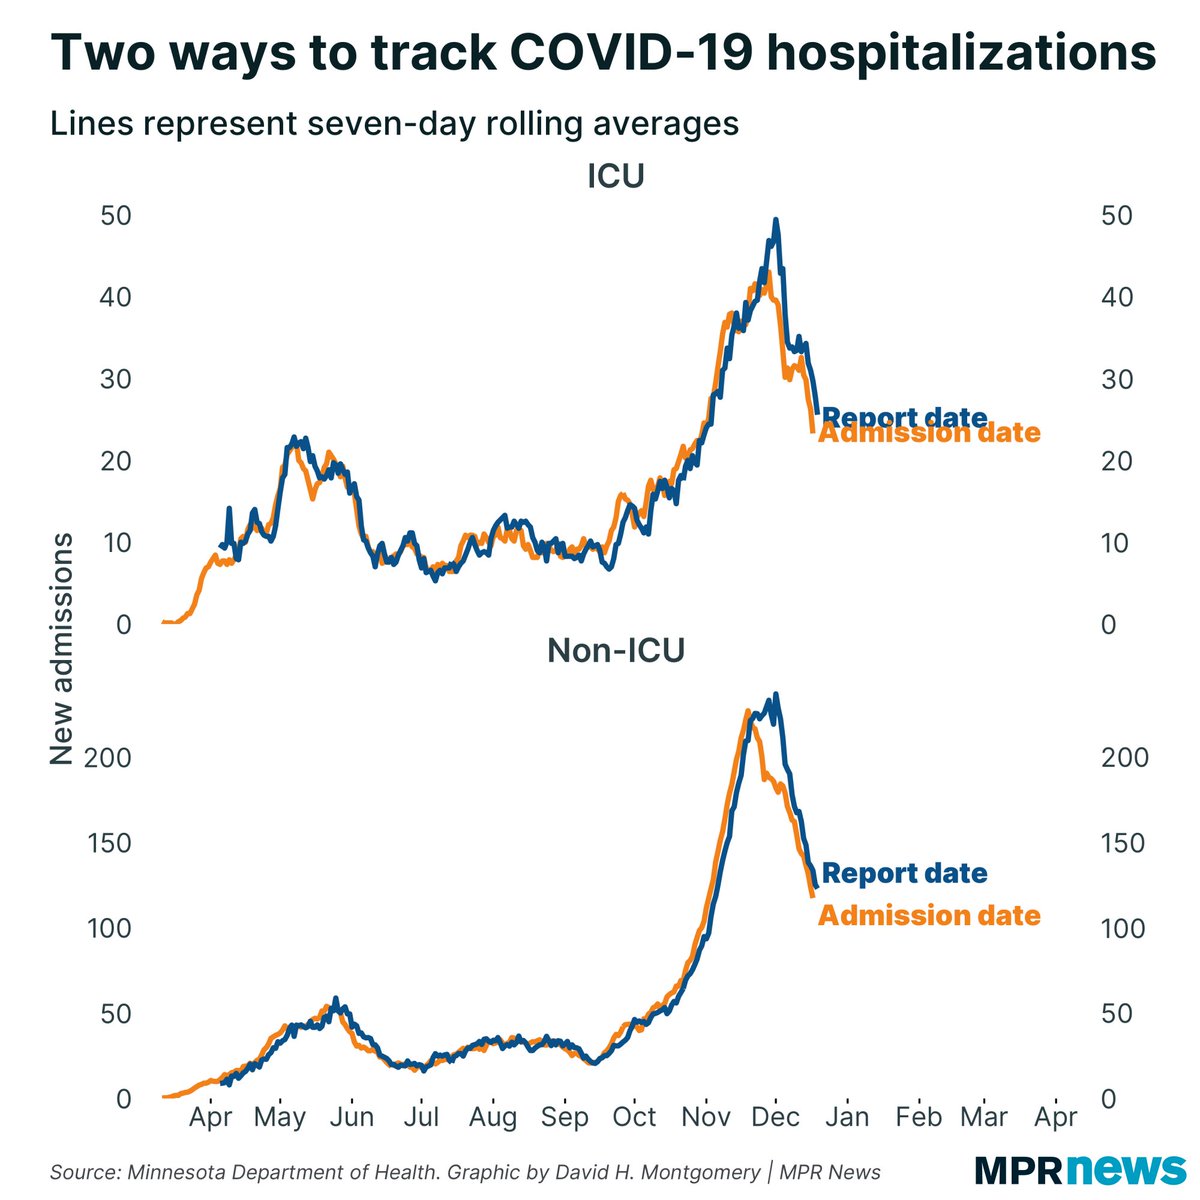  #COVID19 hospitalization rates continue to fall steadily: